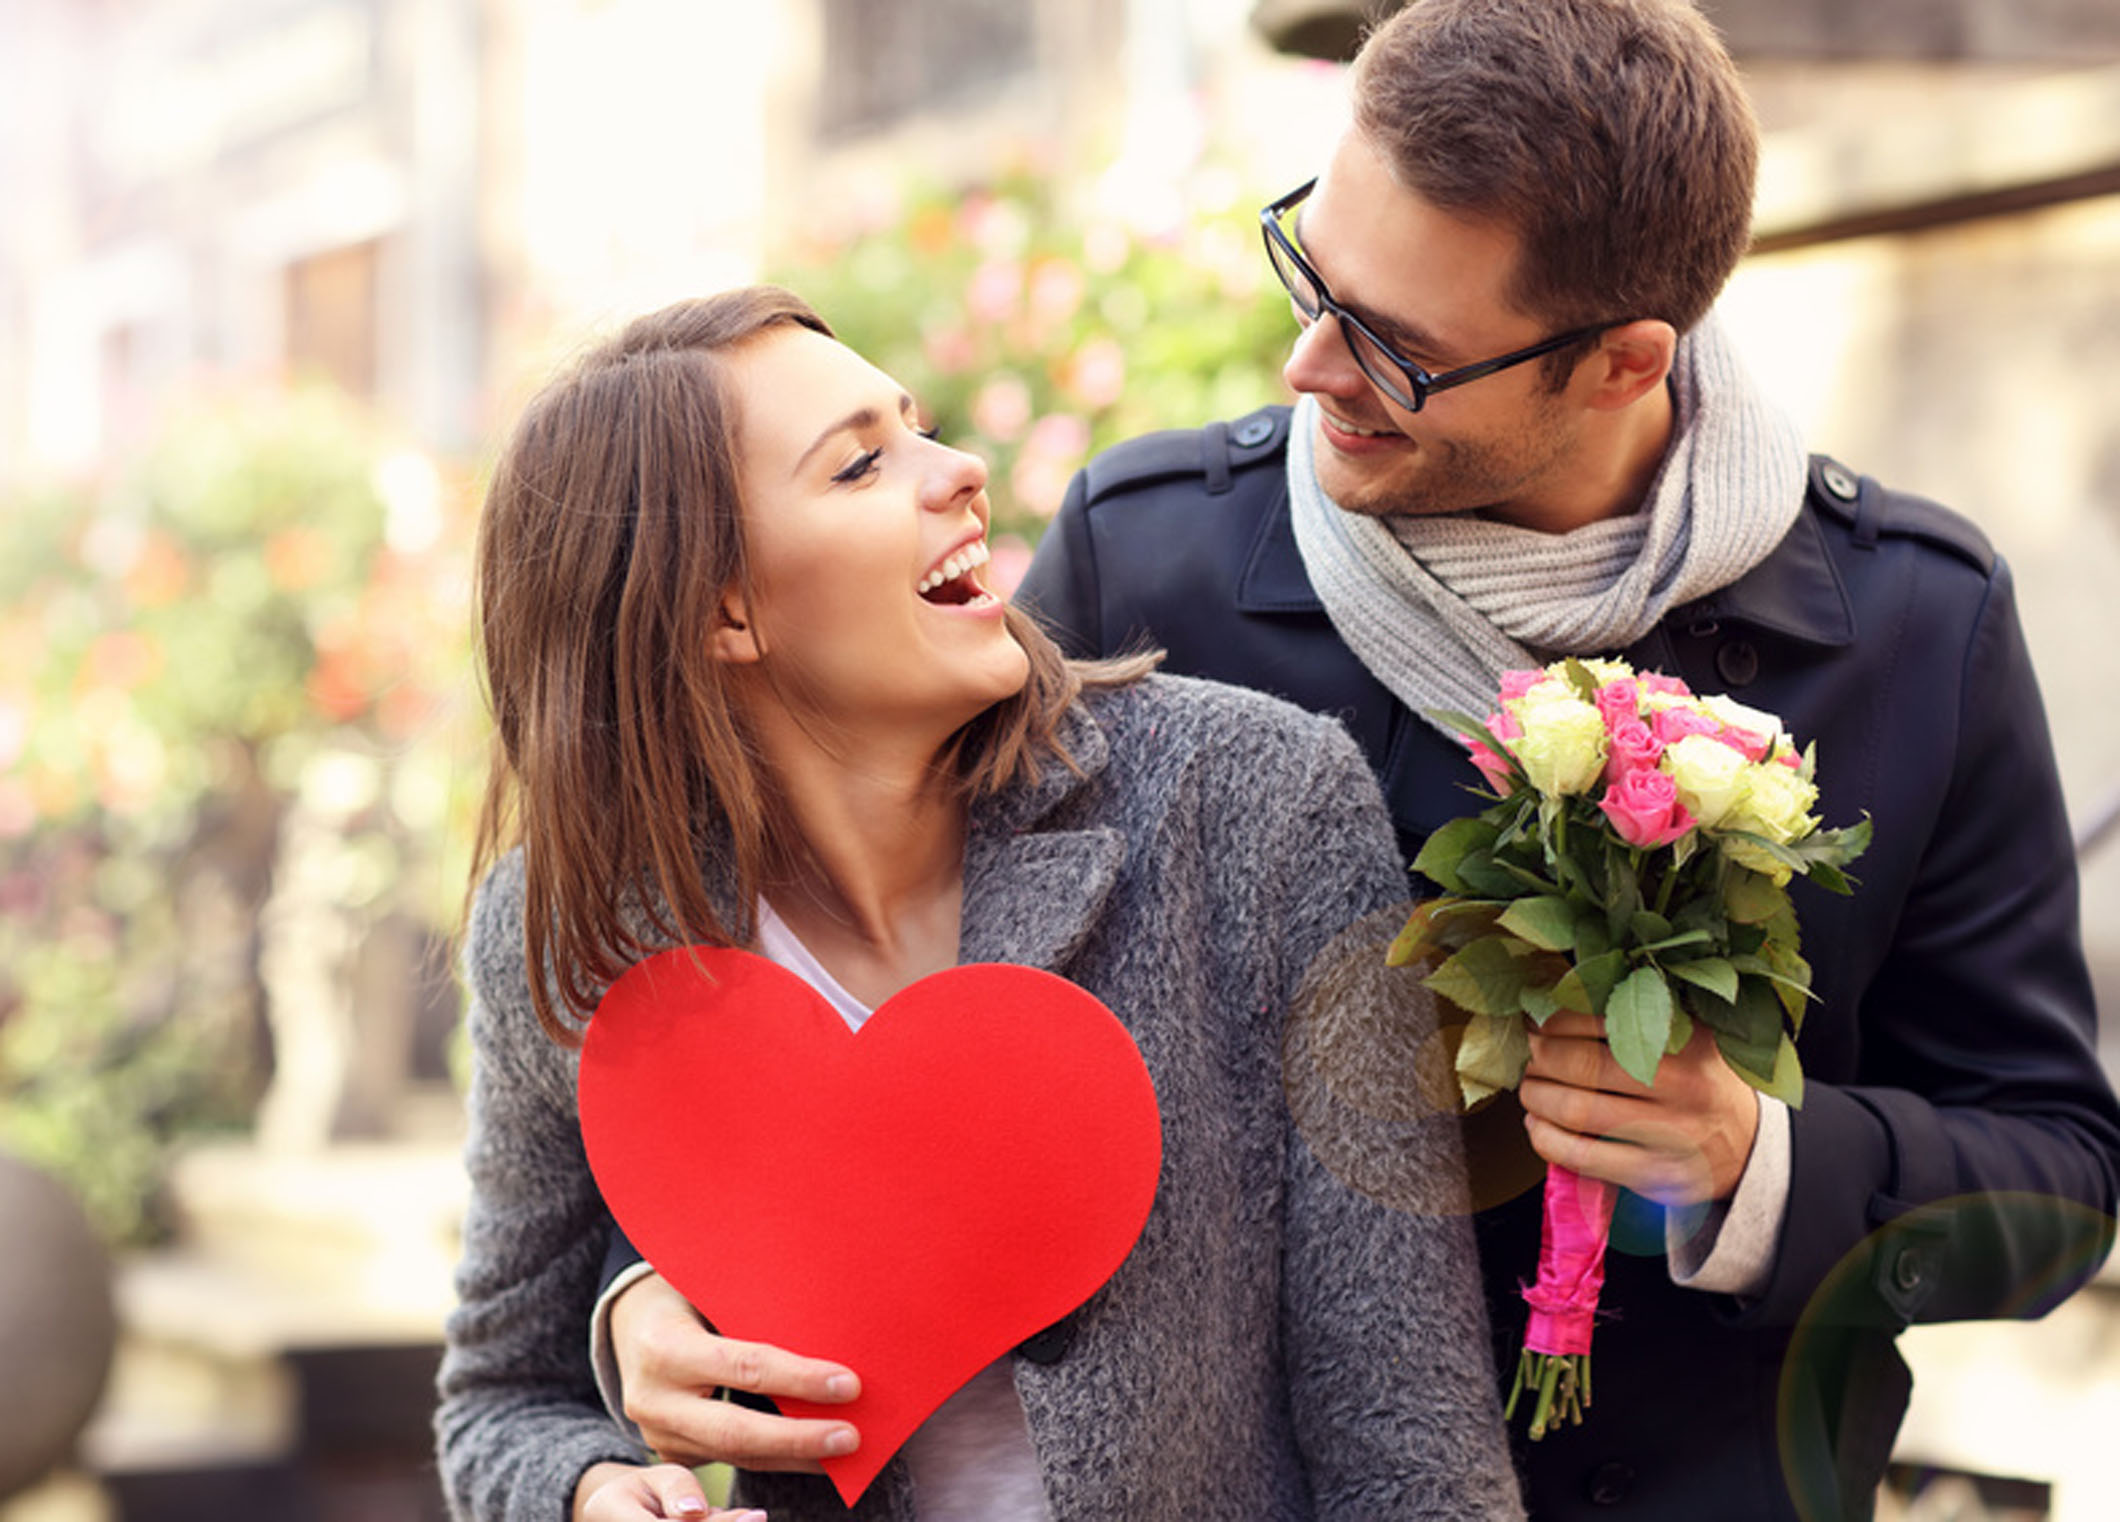 Picture of young man surprising woman with flowers and heart